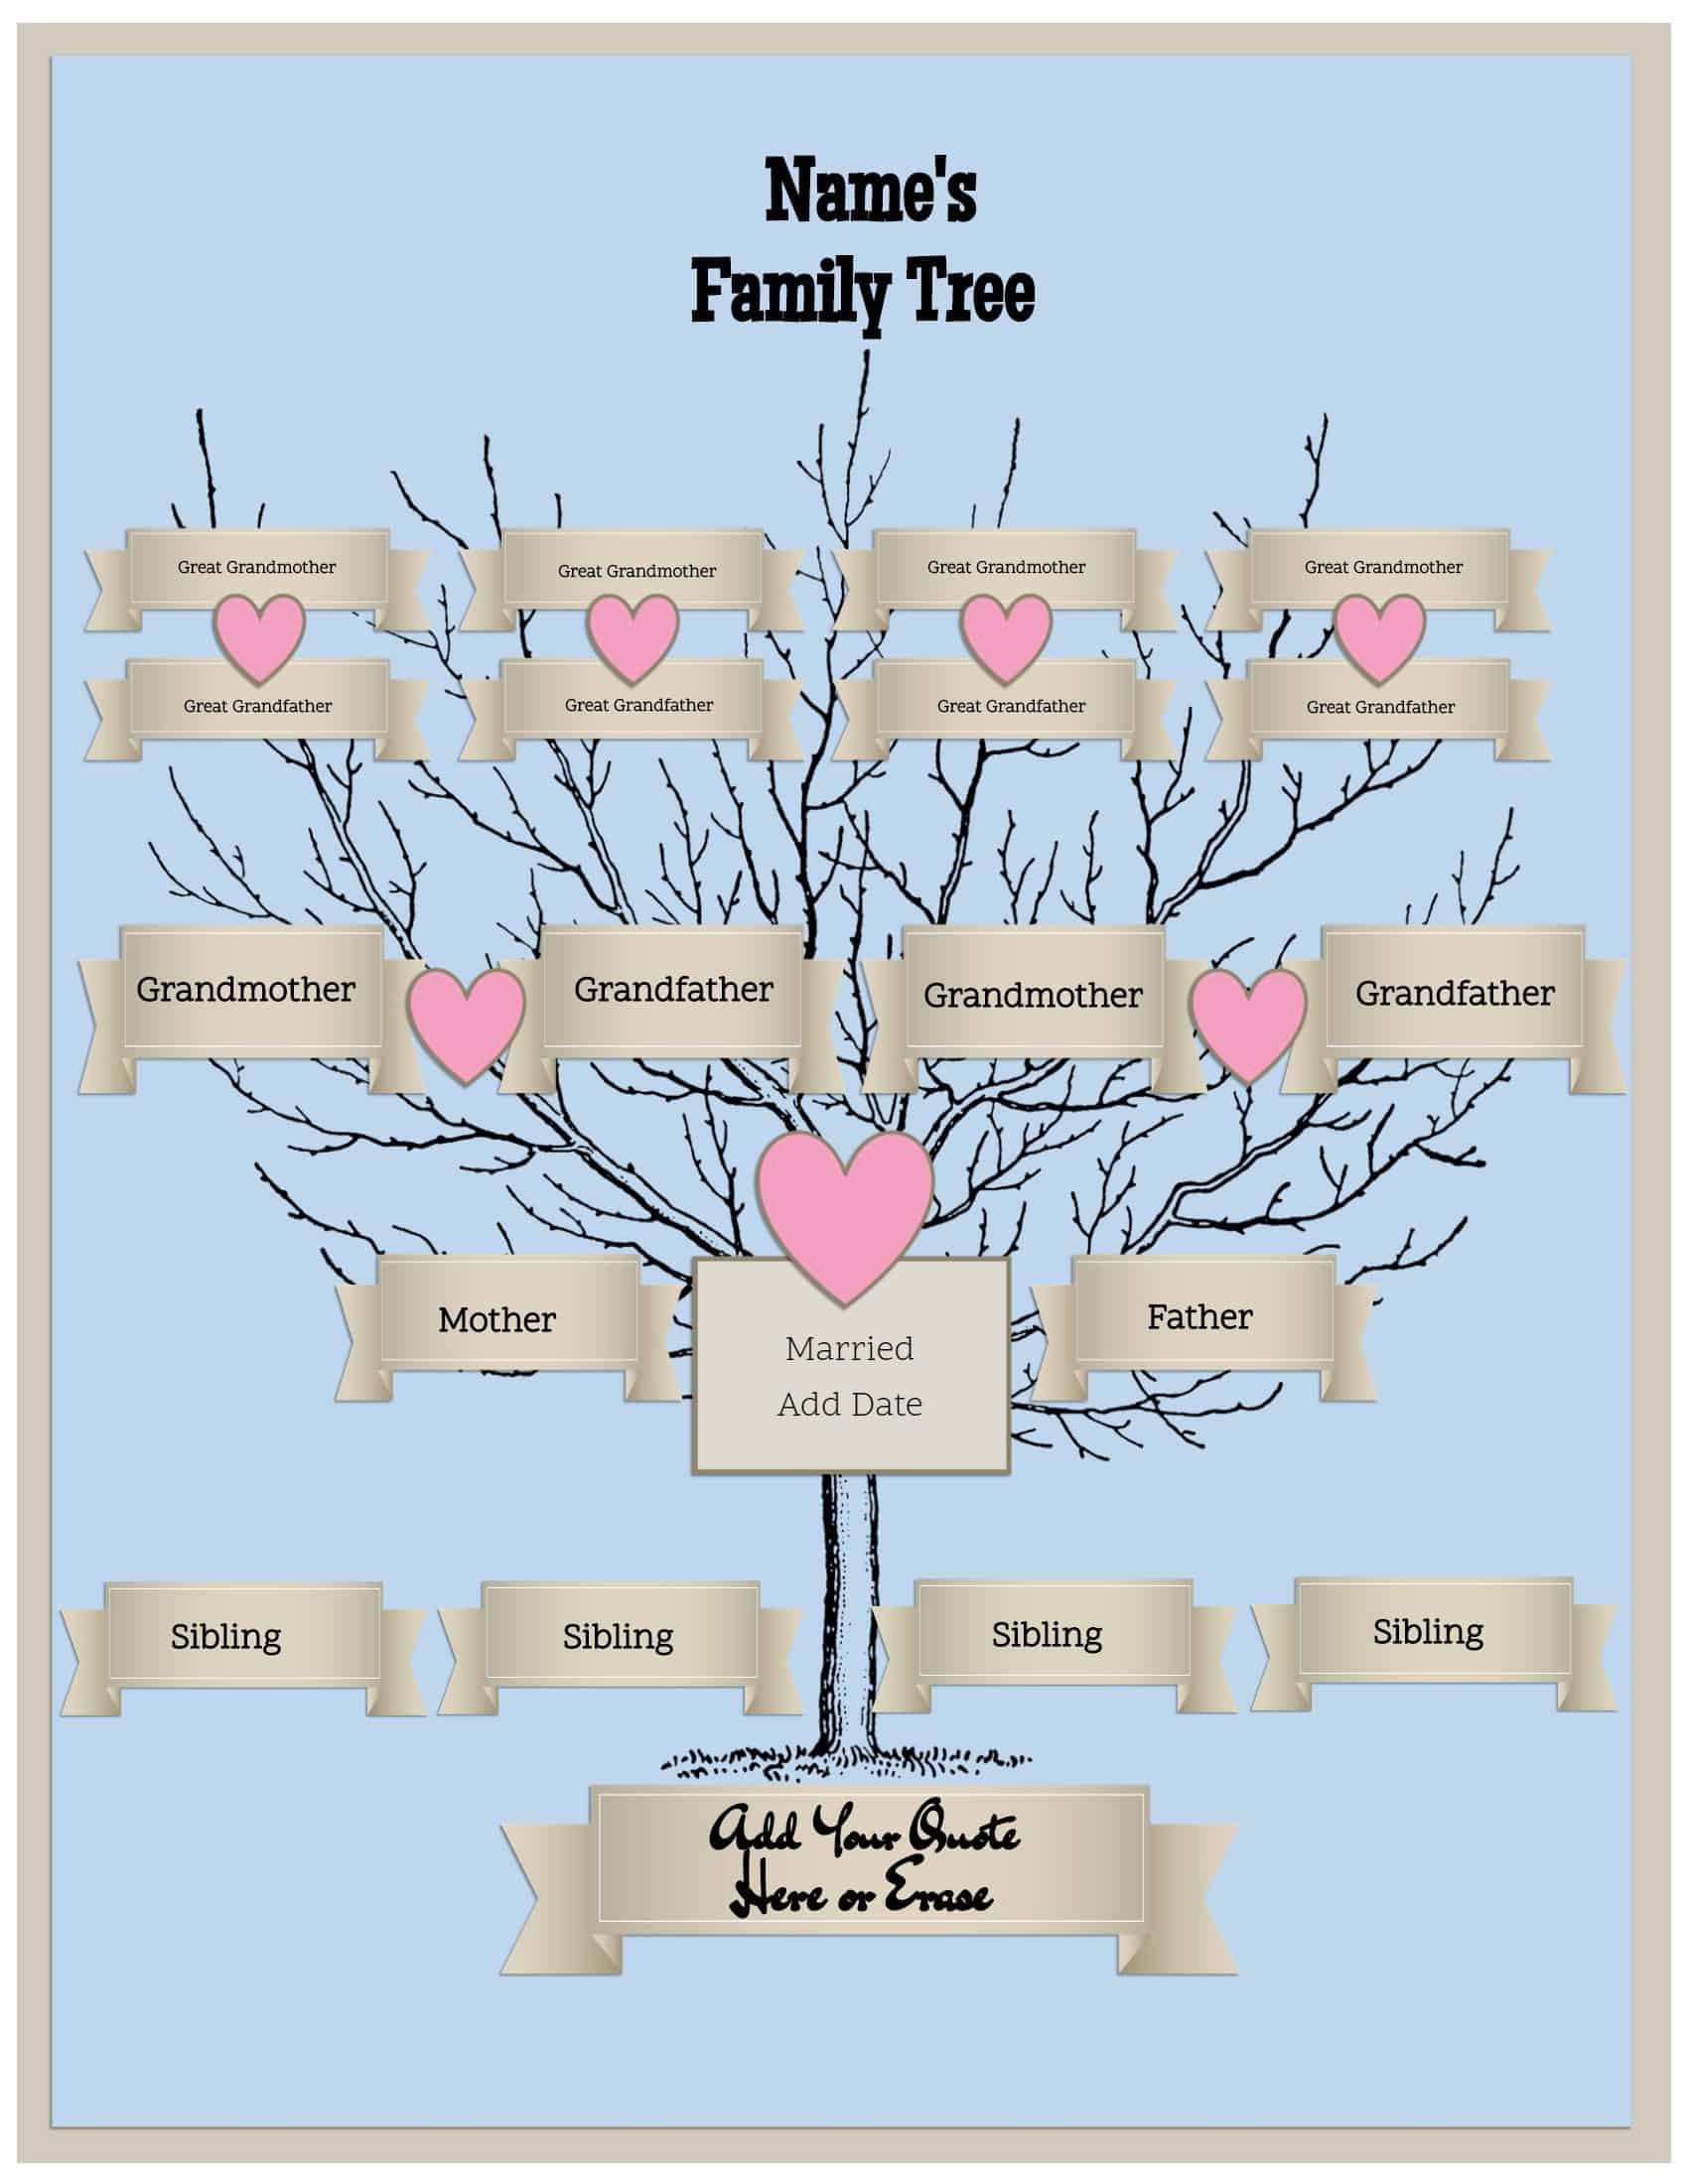 4 Generation Family Tree Template Free to Customize & Print